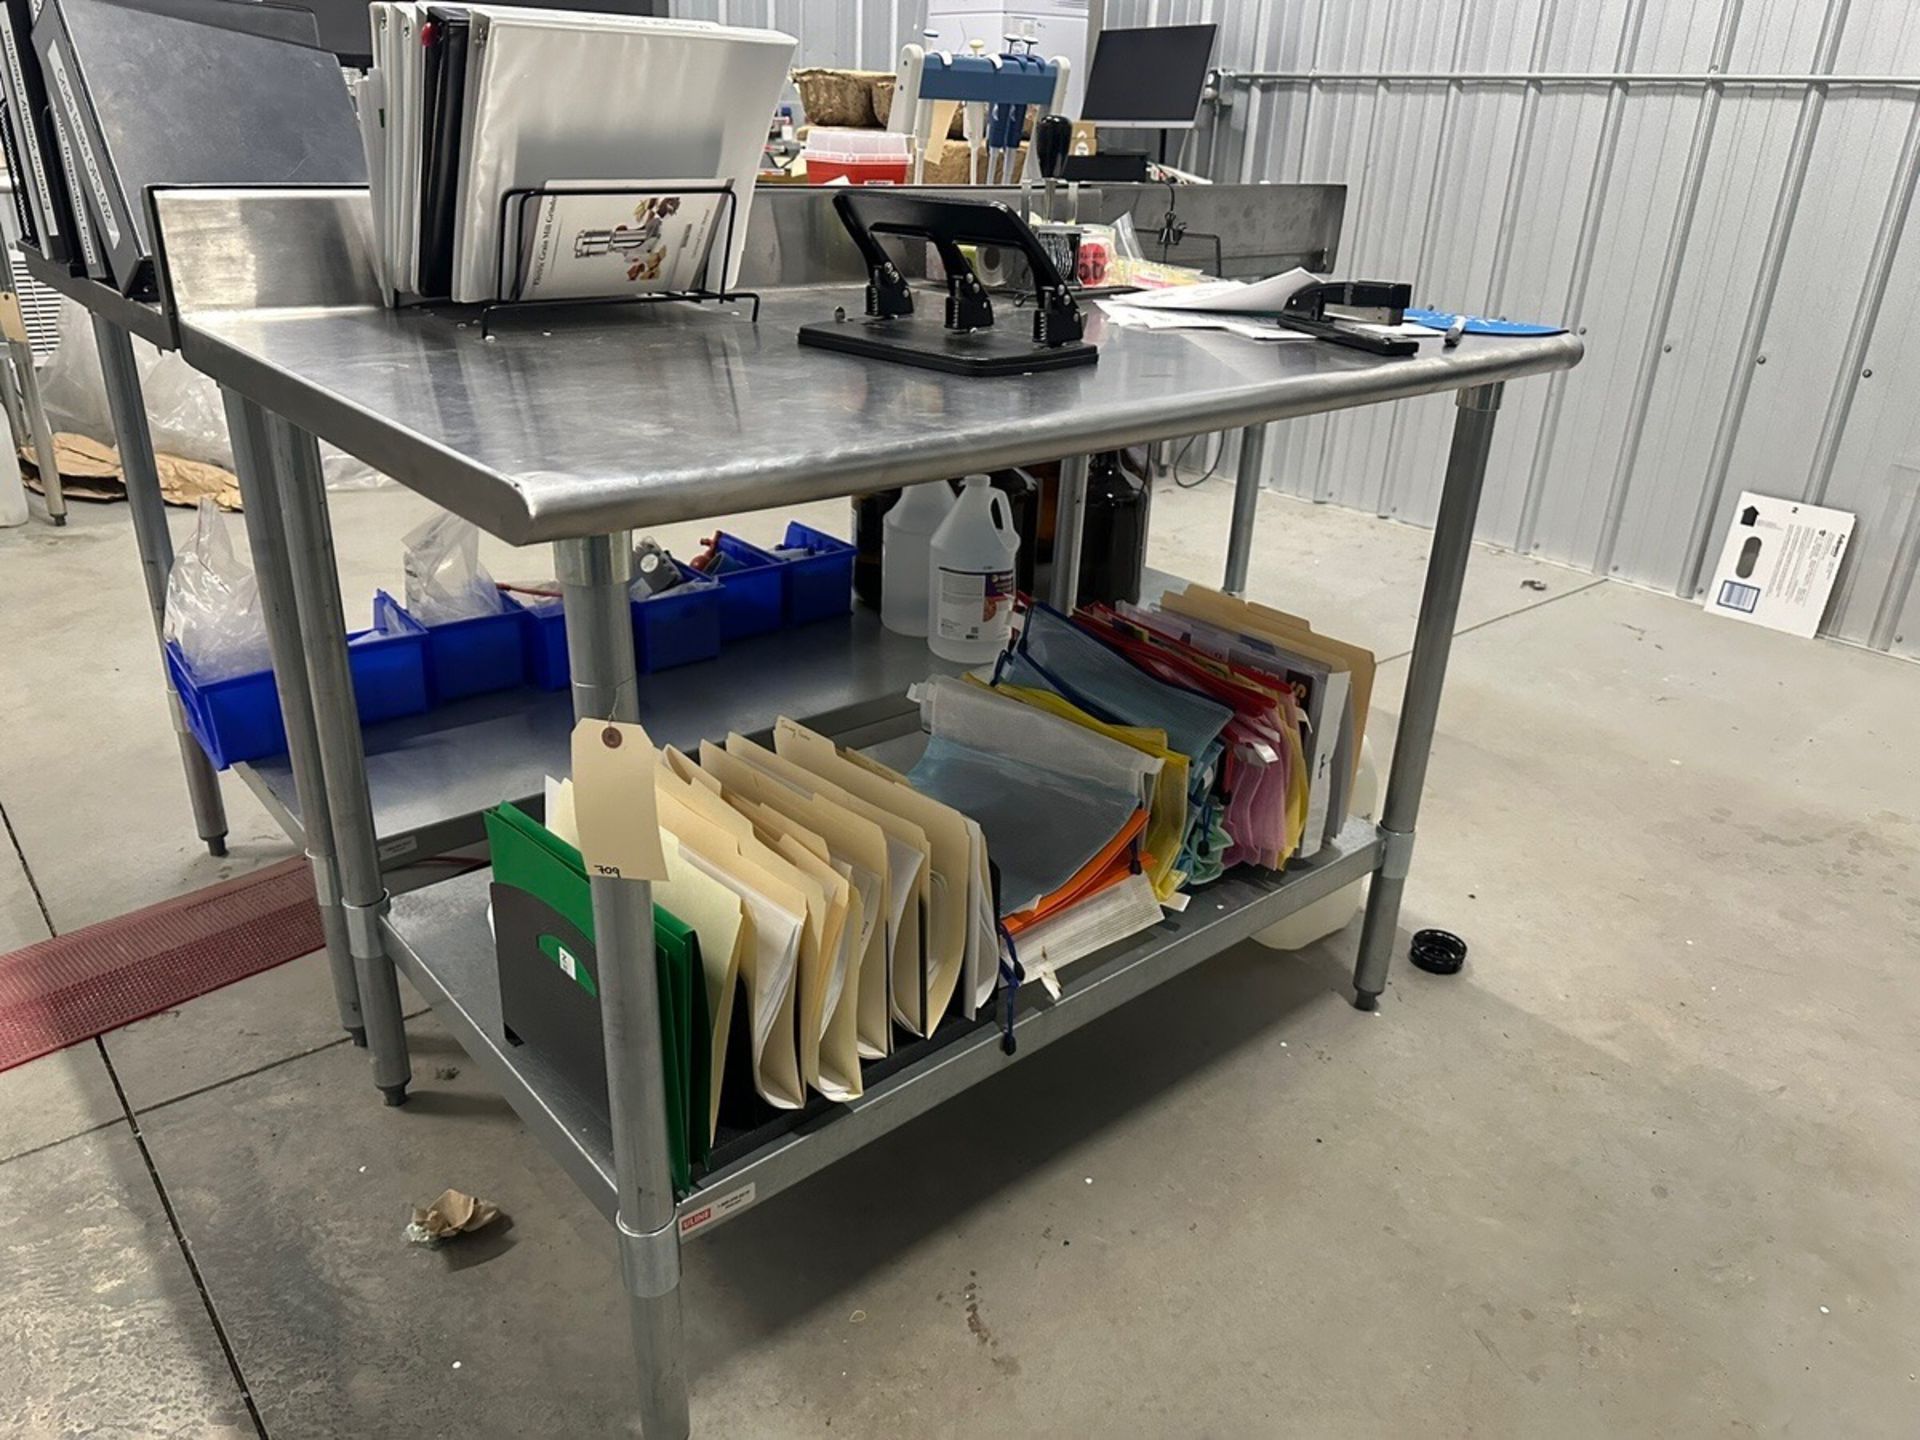 Stainless Steel Table | Rig Fee $50 - Image 2 of 2